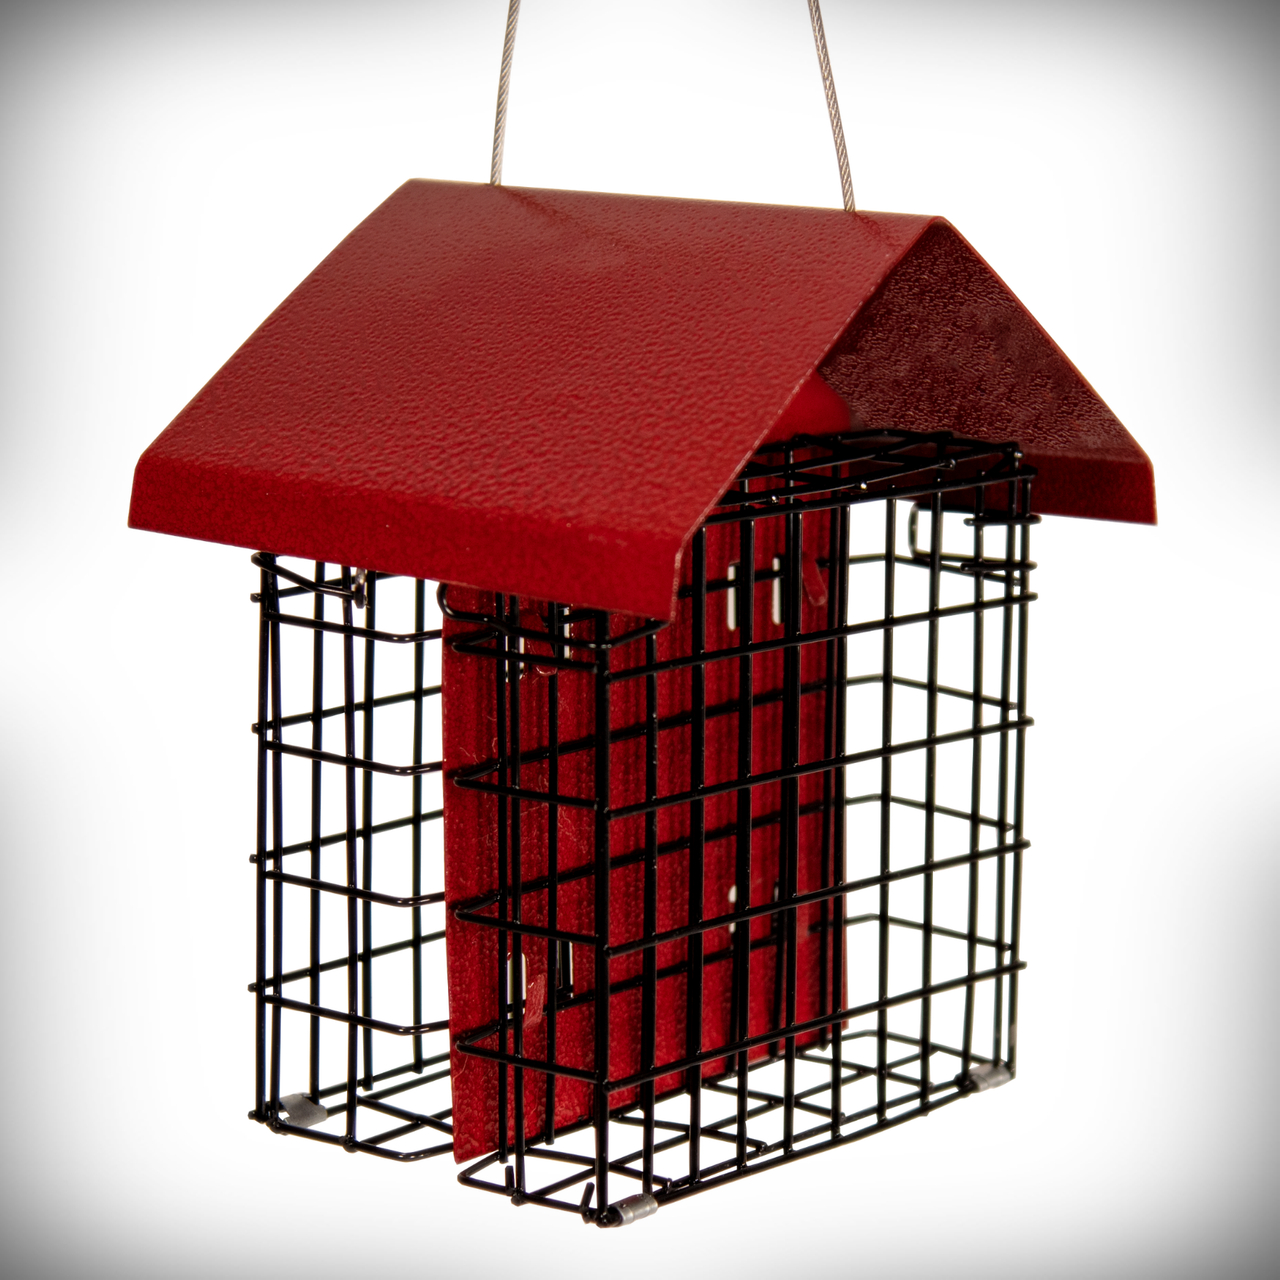 Deluxe Metal House Double Suet Feeder Red